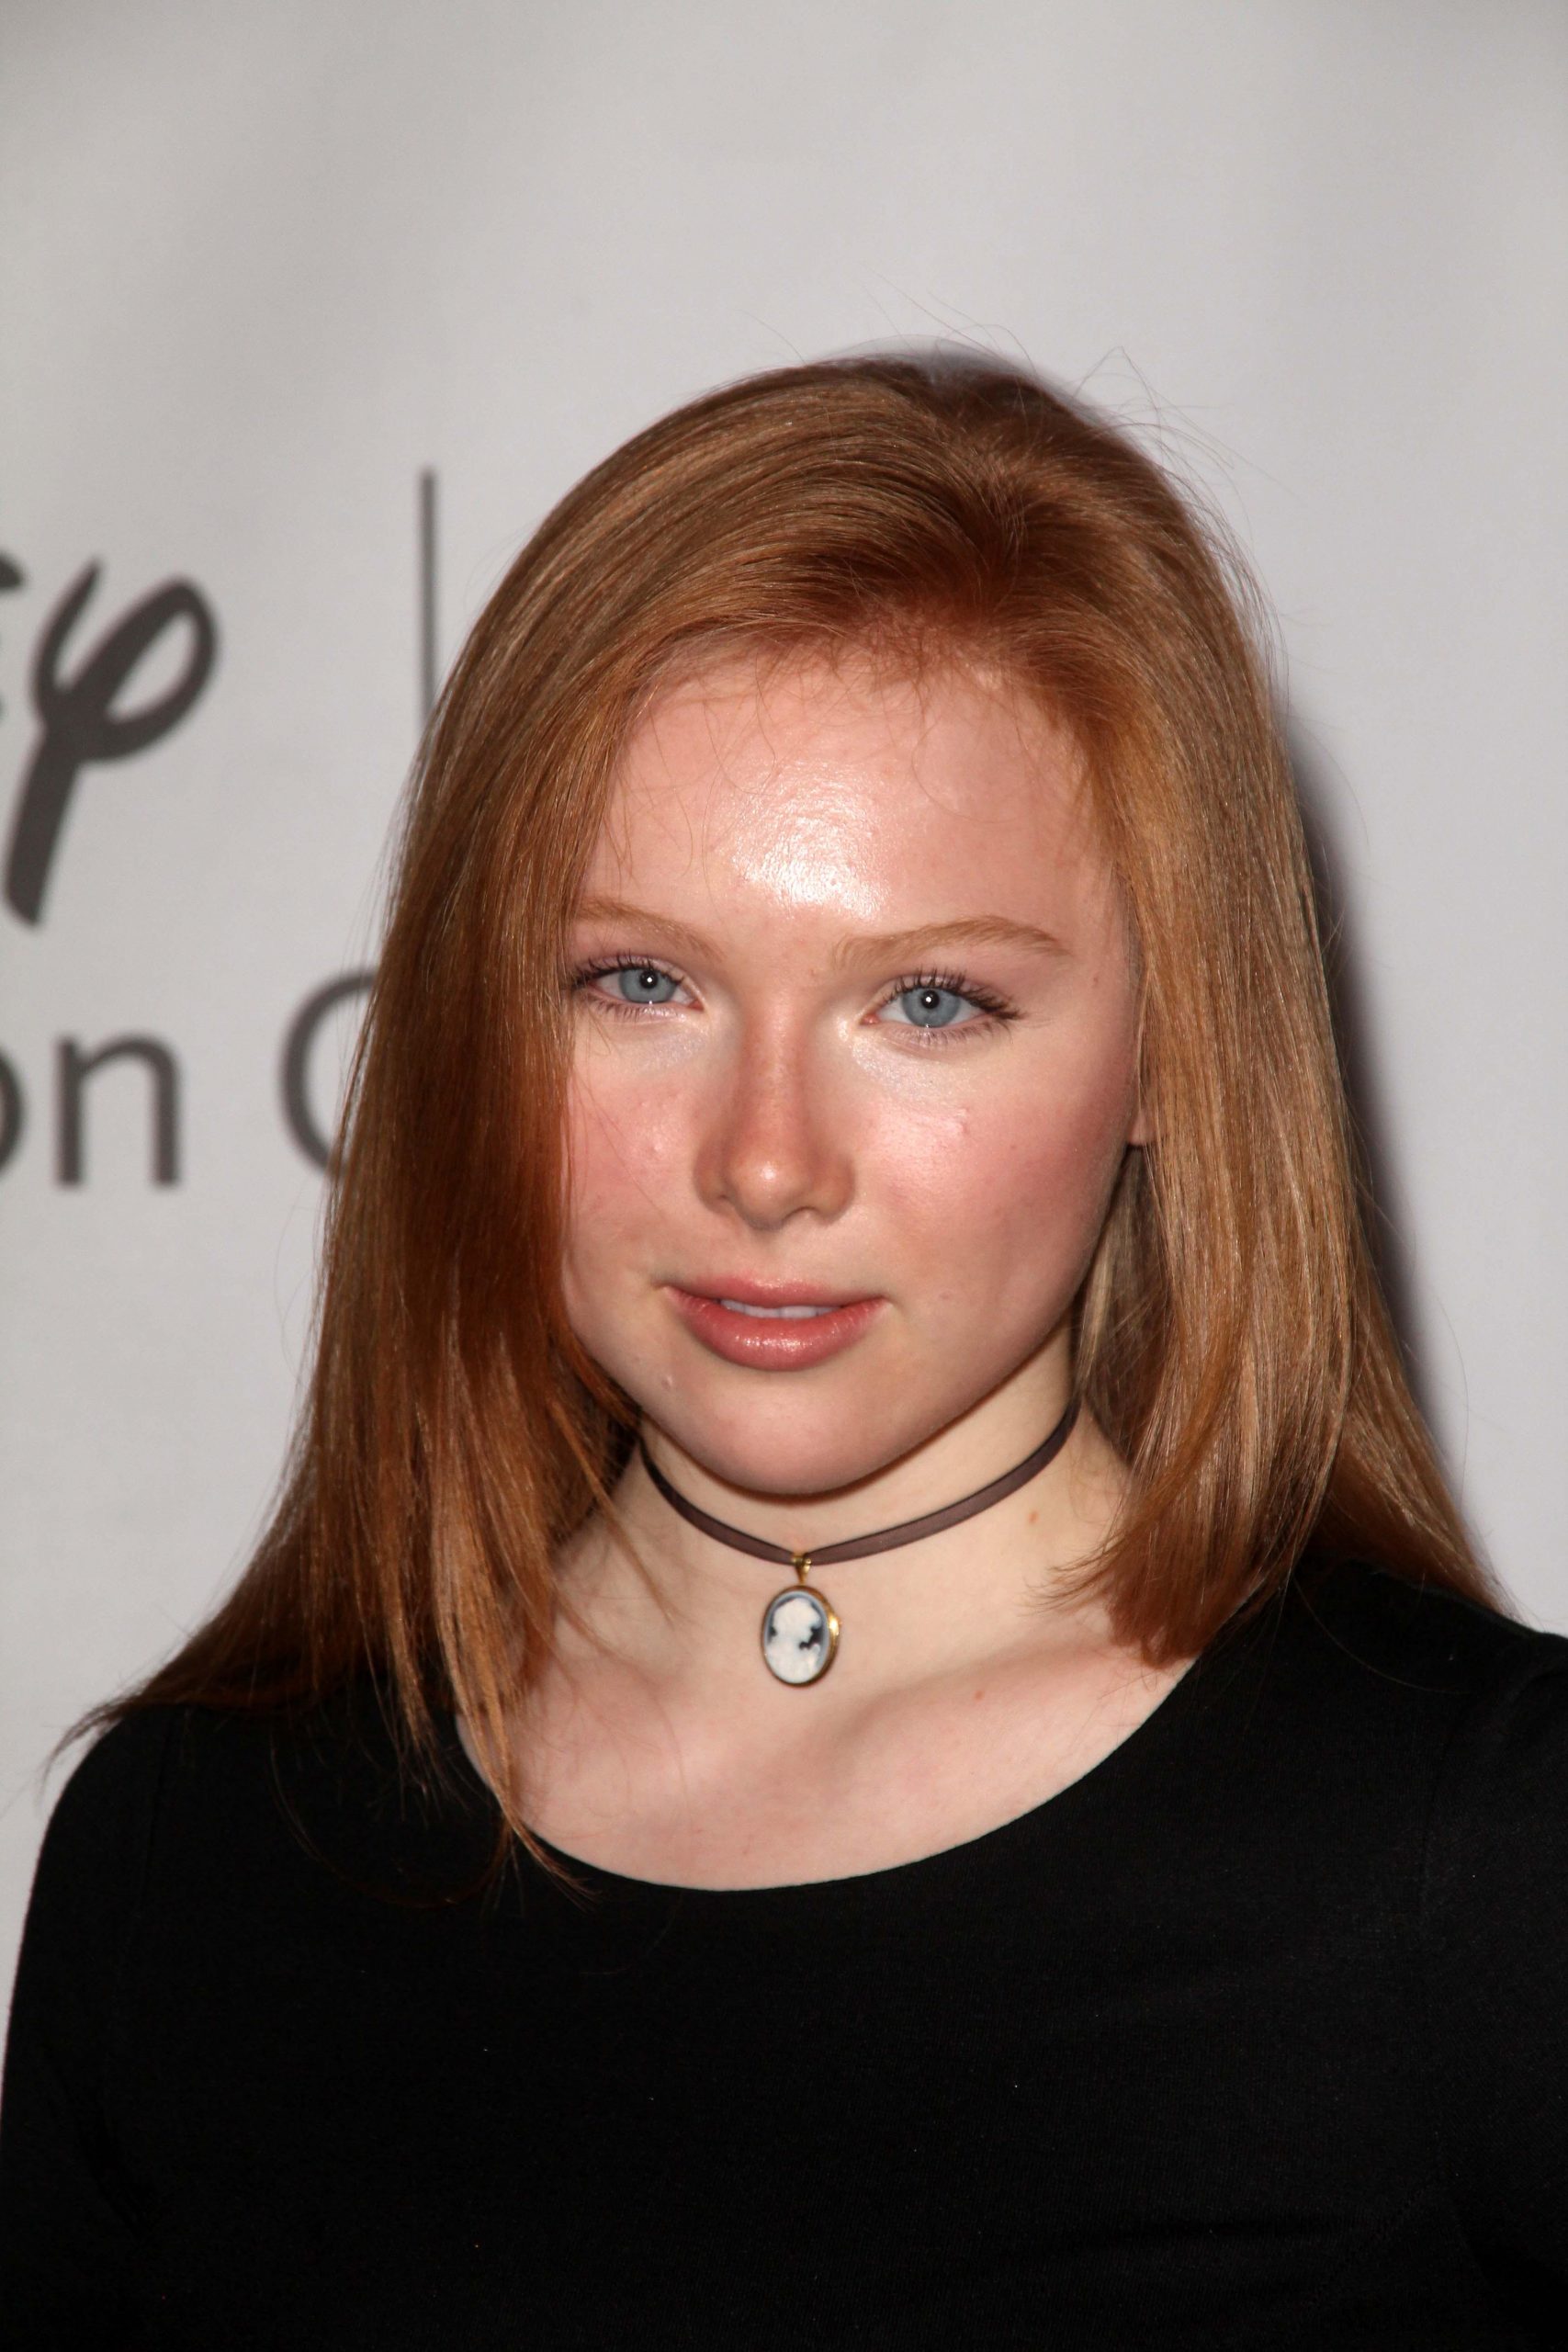 70+ Hot Pictures Of Molly C. Quinn Are God’s Gift For Her Die Hard Fans 140